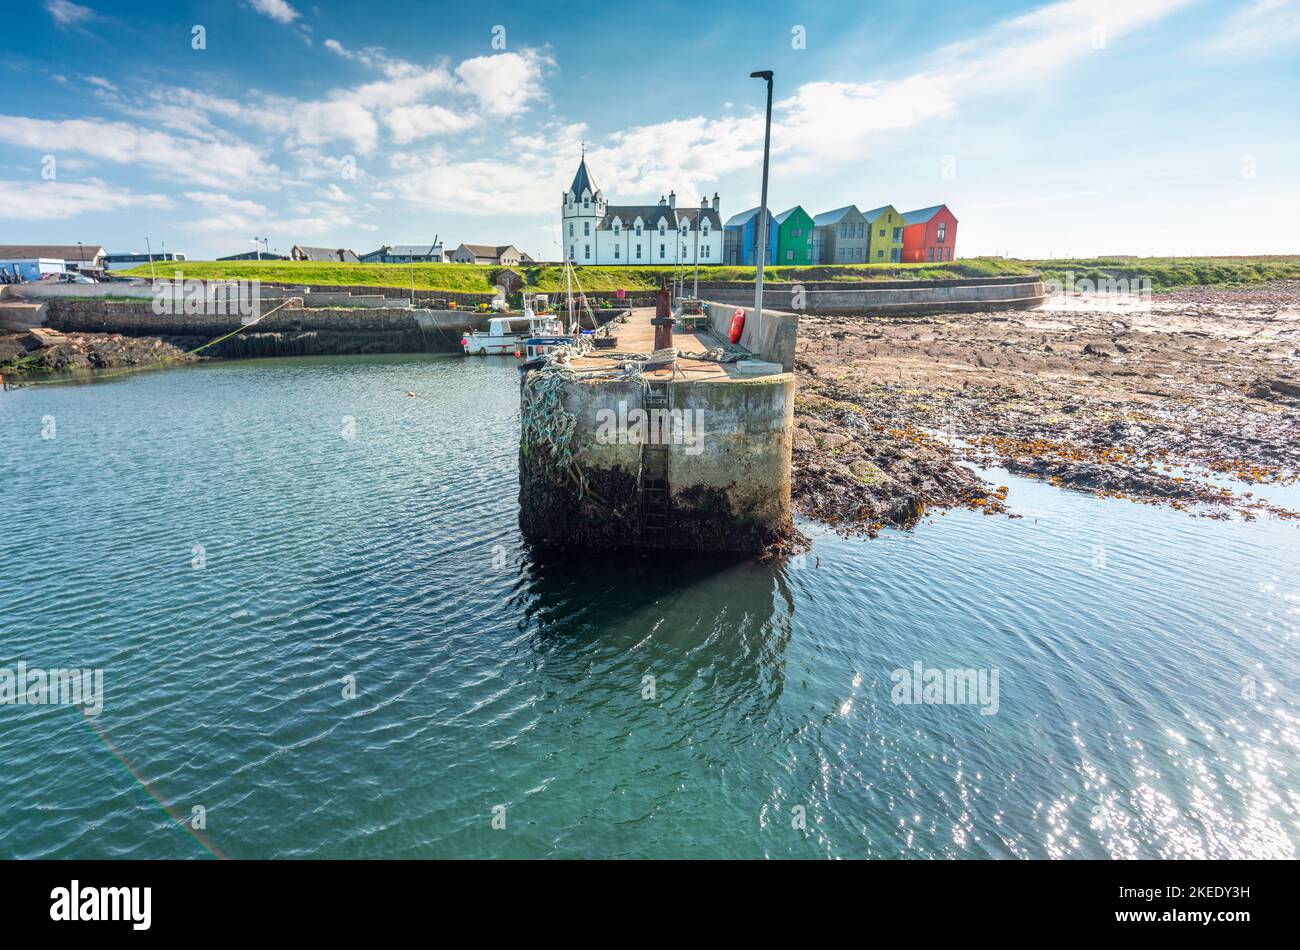 The passenger ferry jetty,where people board service to Orkney Islands,calm blue sea,close to iconic tourist landmark with white signpost,hotel and co Stock Photo